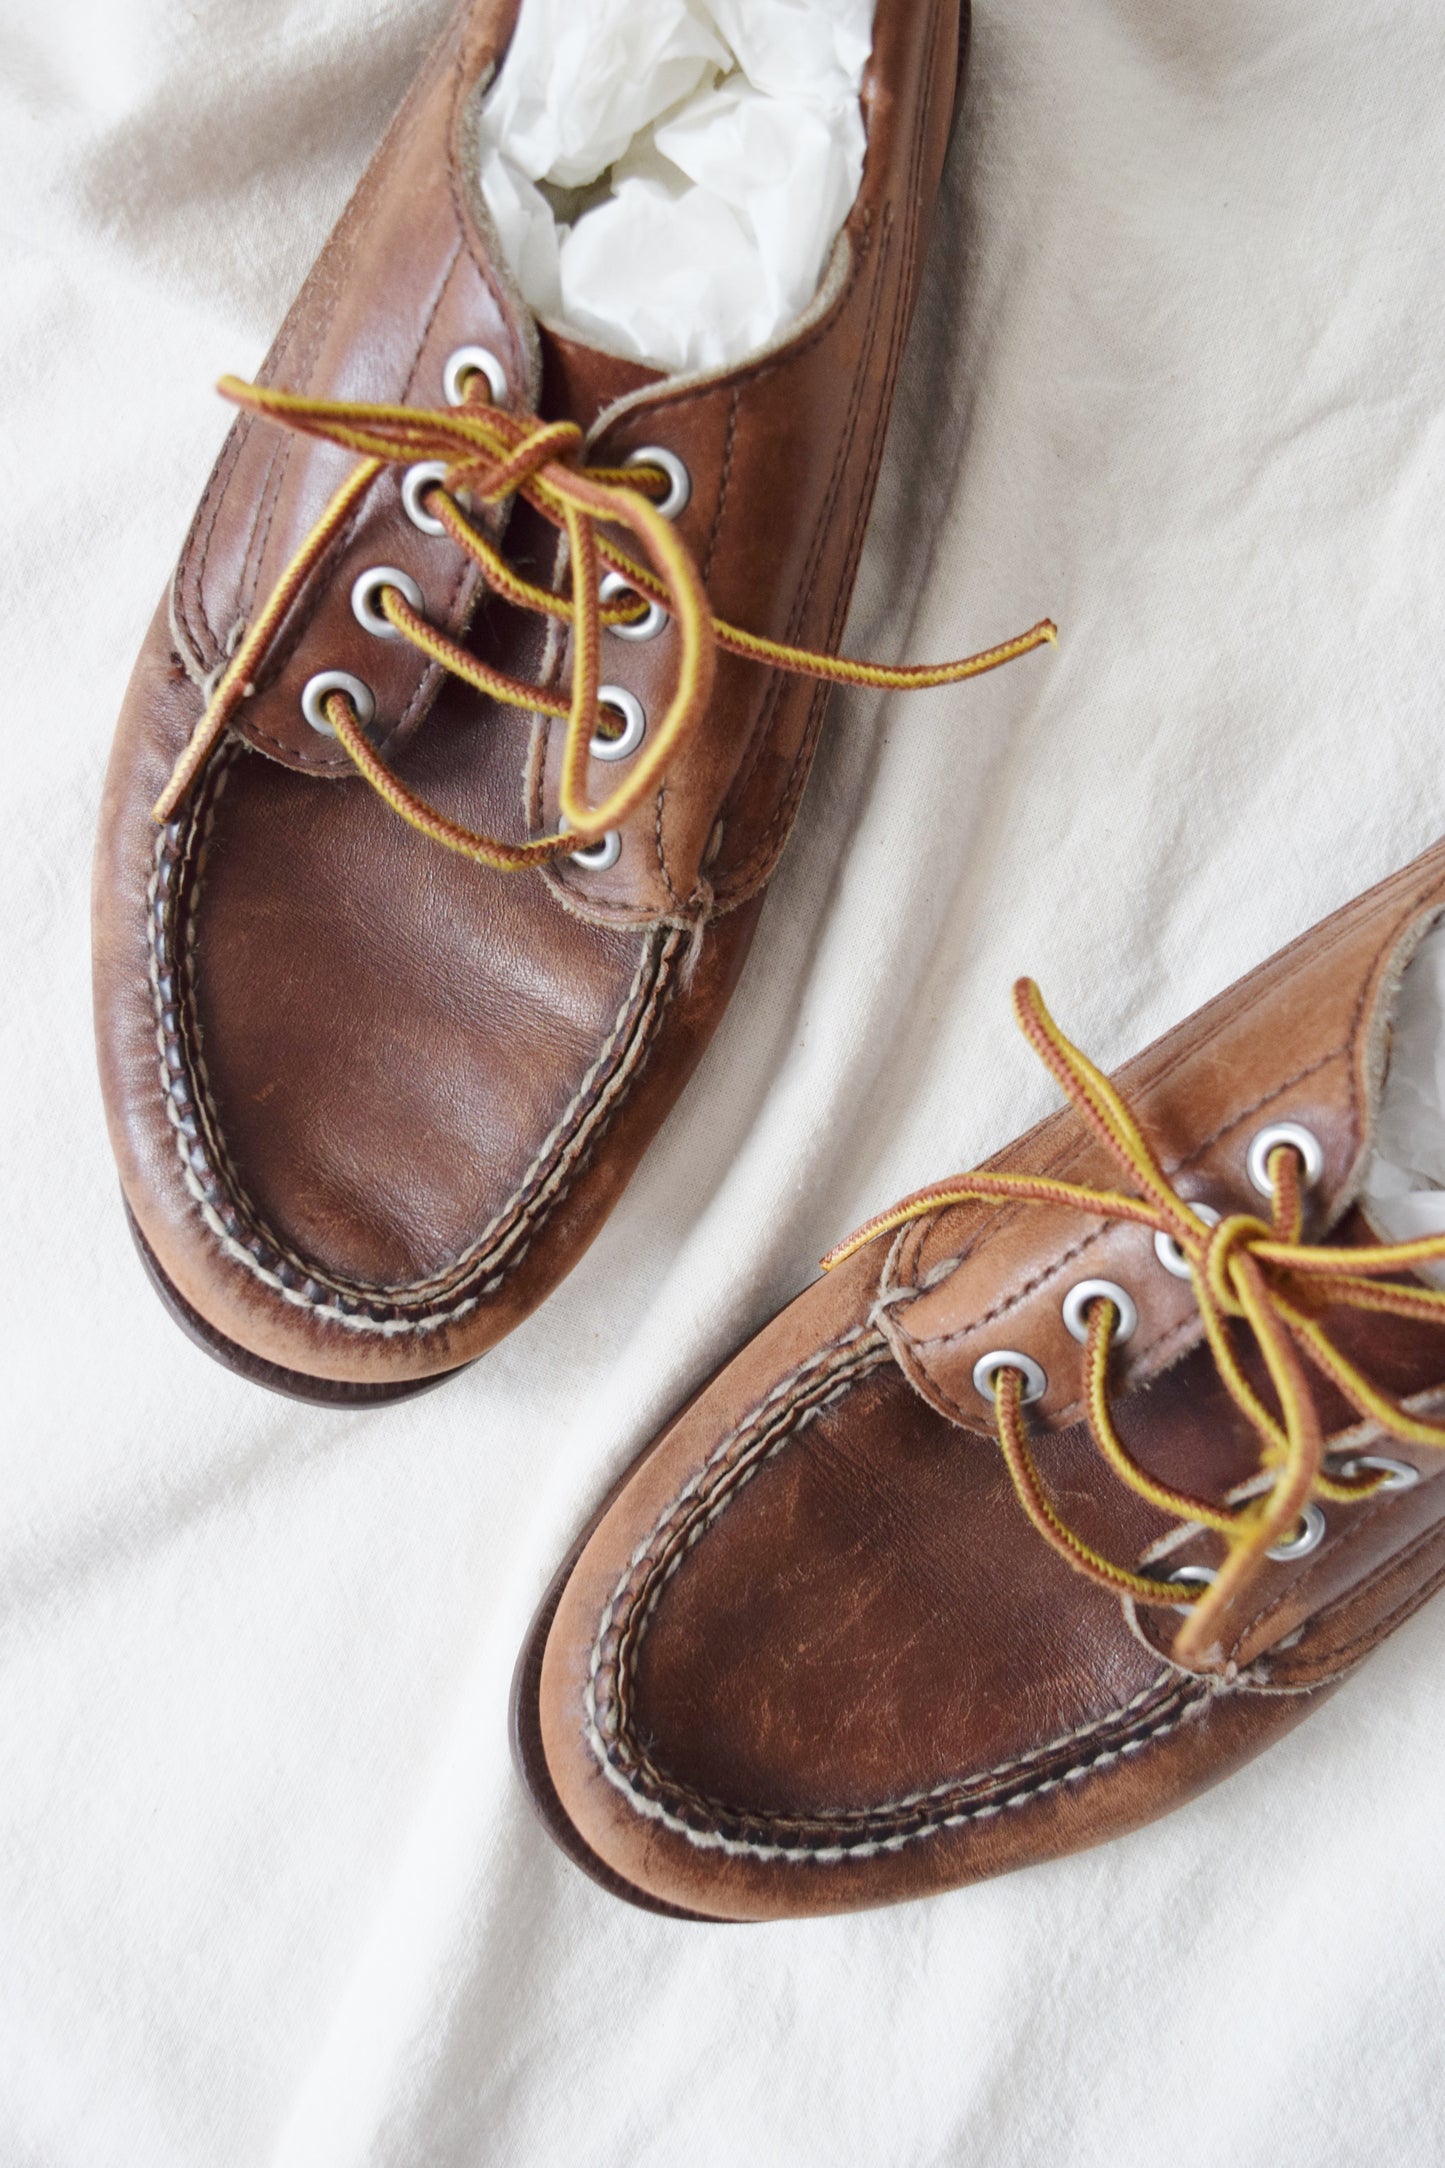 Vintage LL Bean Topsiders | Loafers | Boat Shoes | US 8-8.5 (EU 38-39, UK 6-6.5)